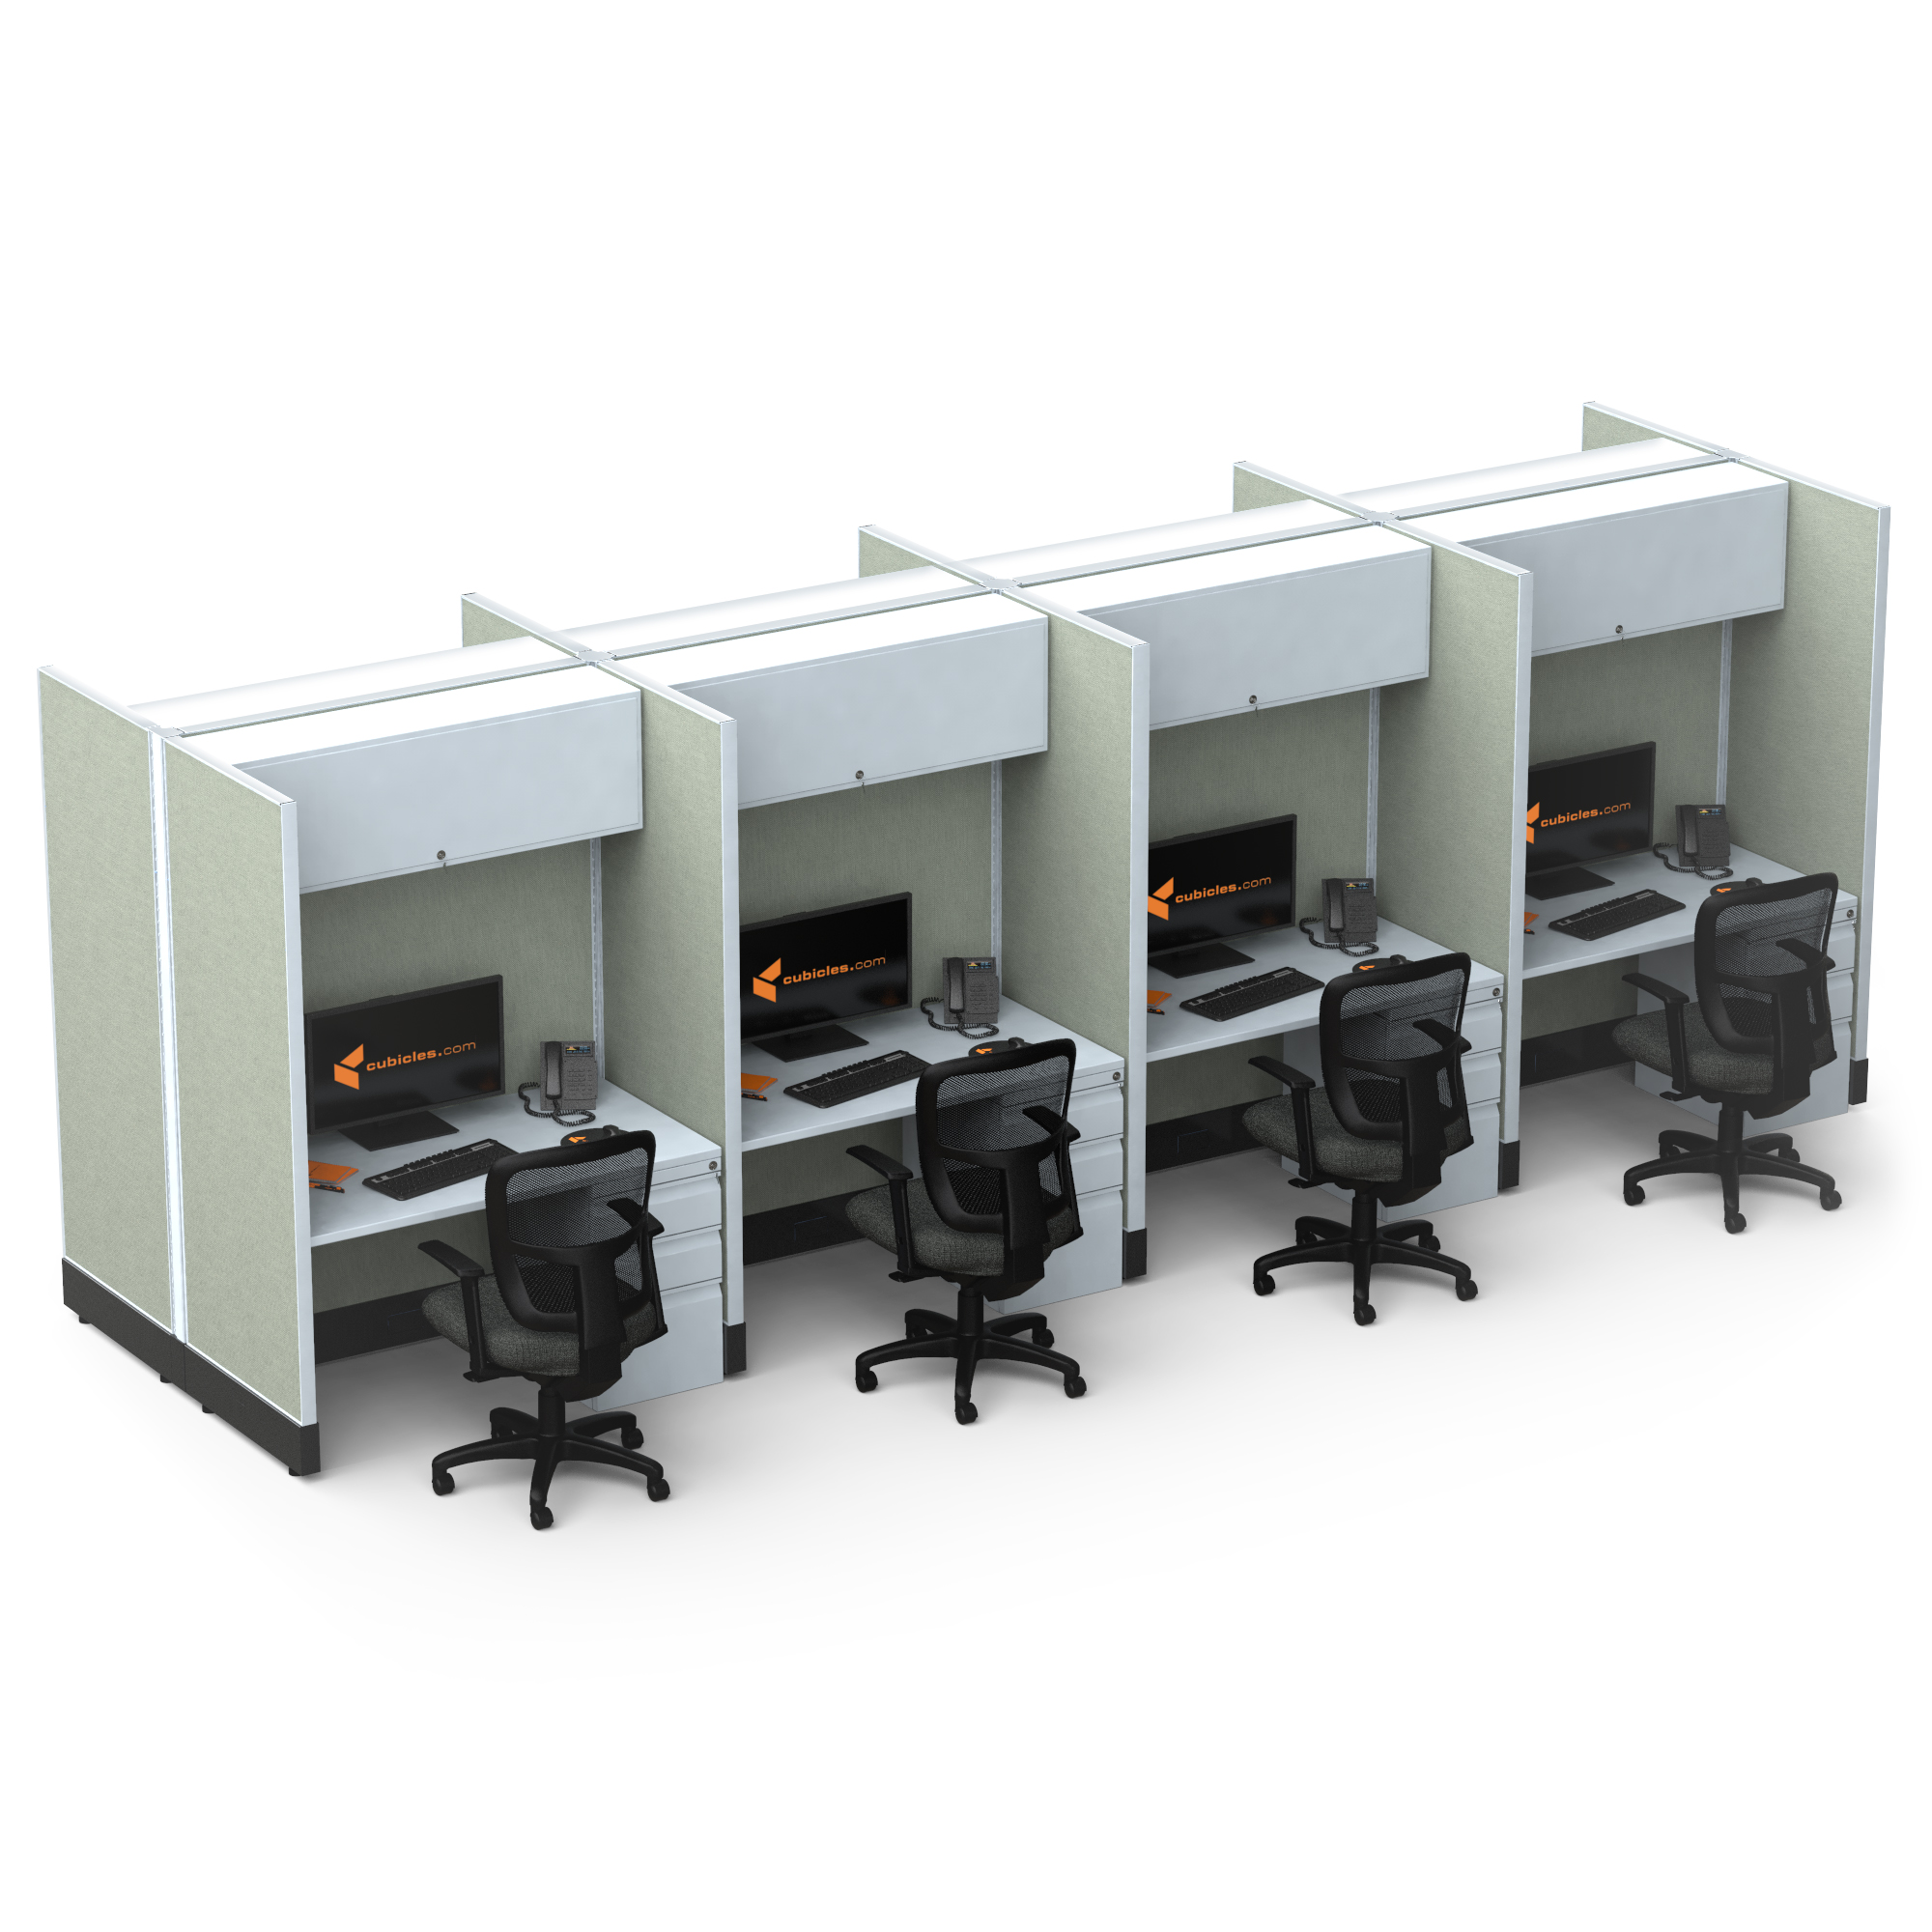 Hot desking hoteling stations 8c pack powered